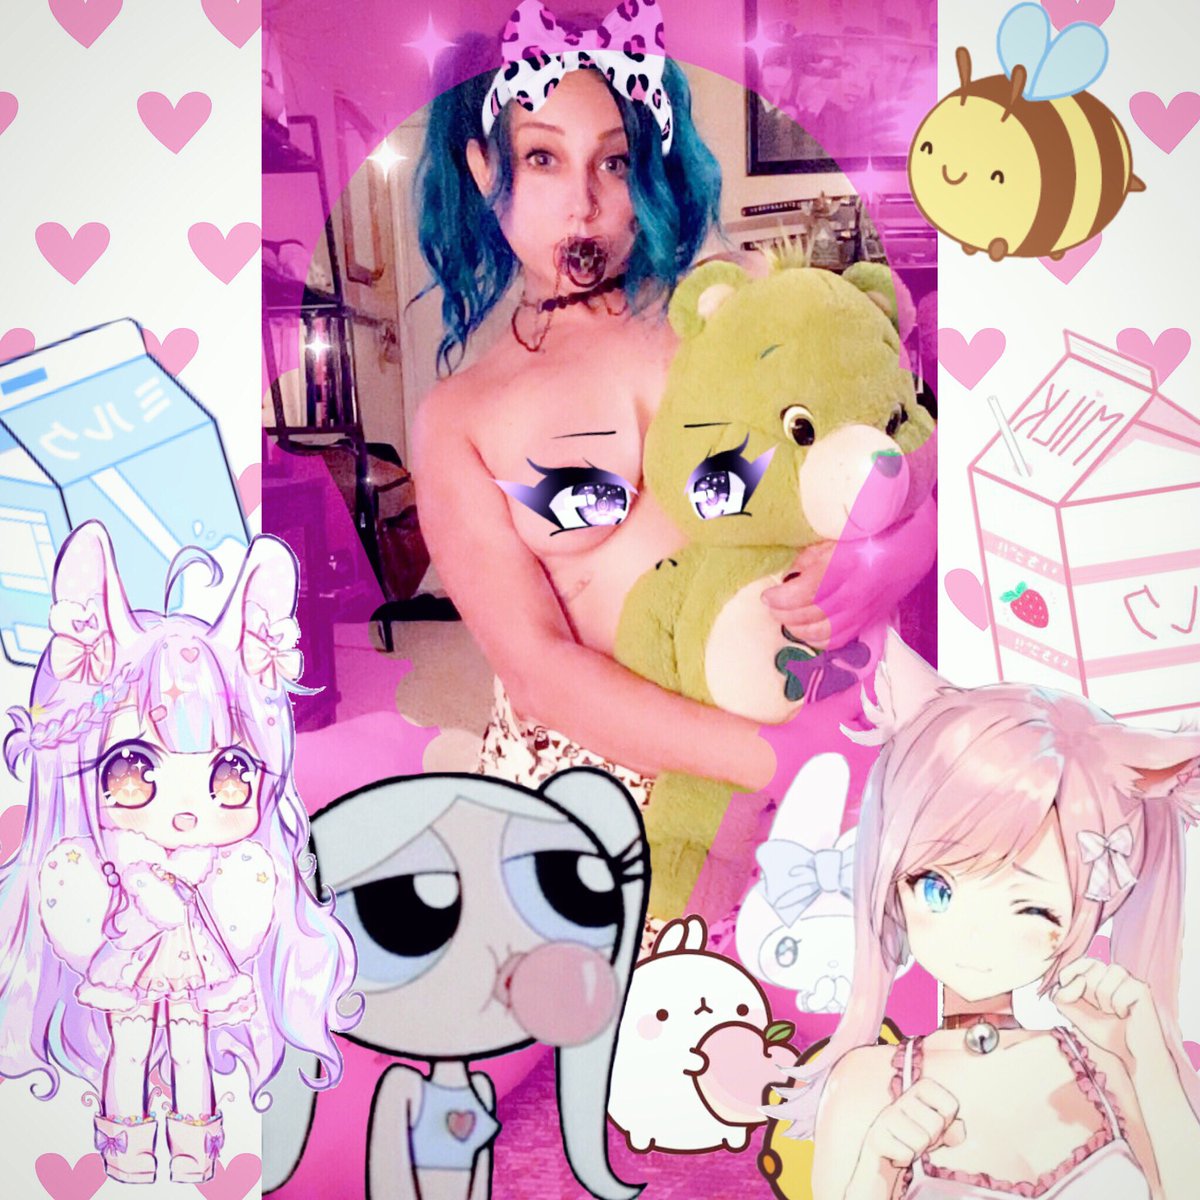 #ddlg. #abdl. #stickers. #naughty. 